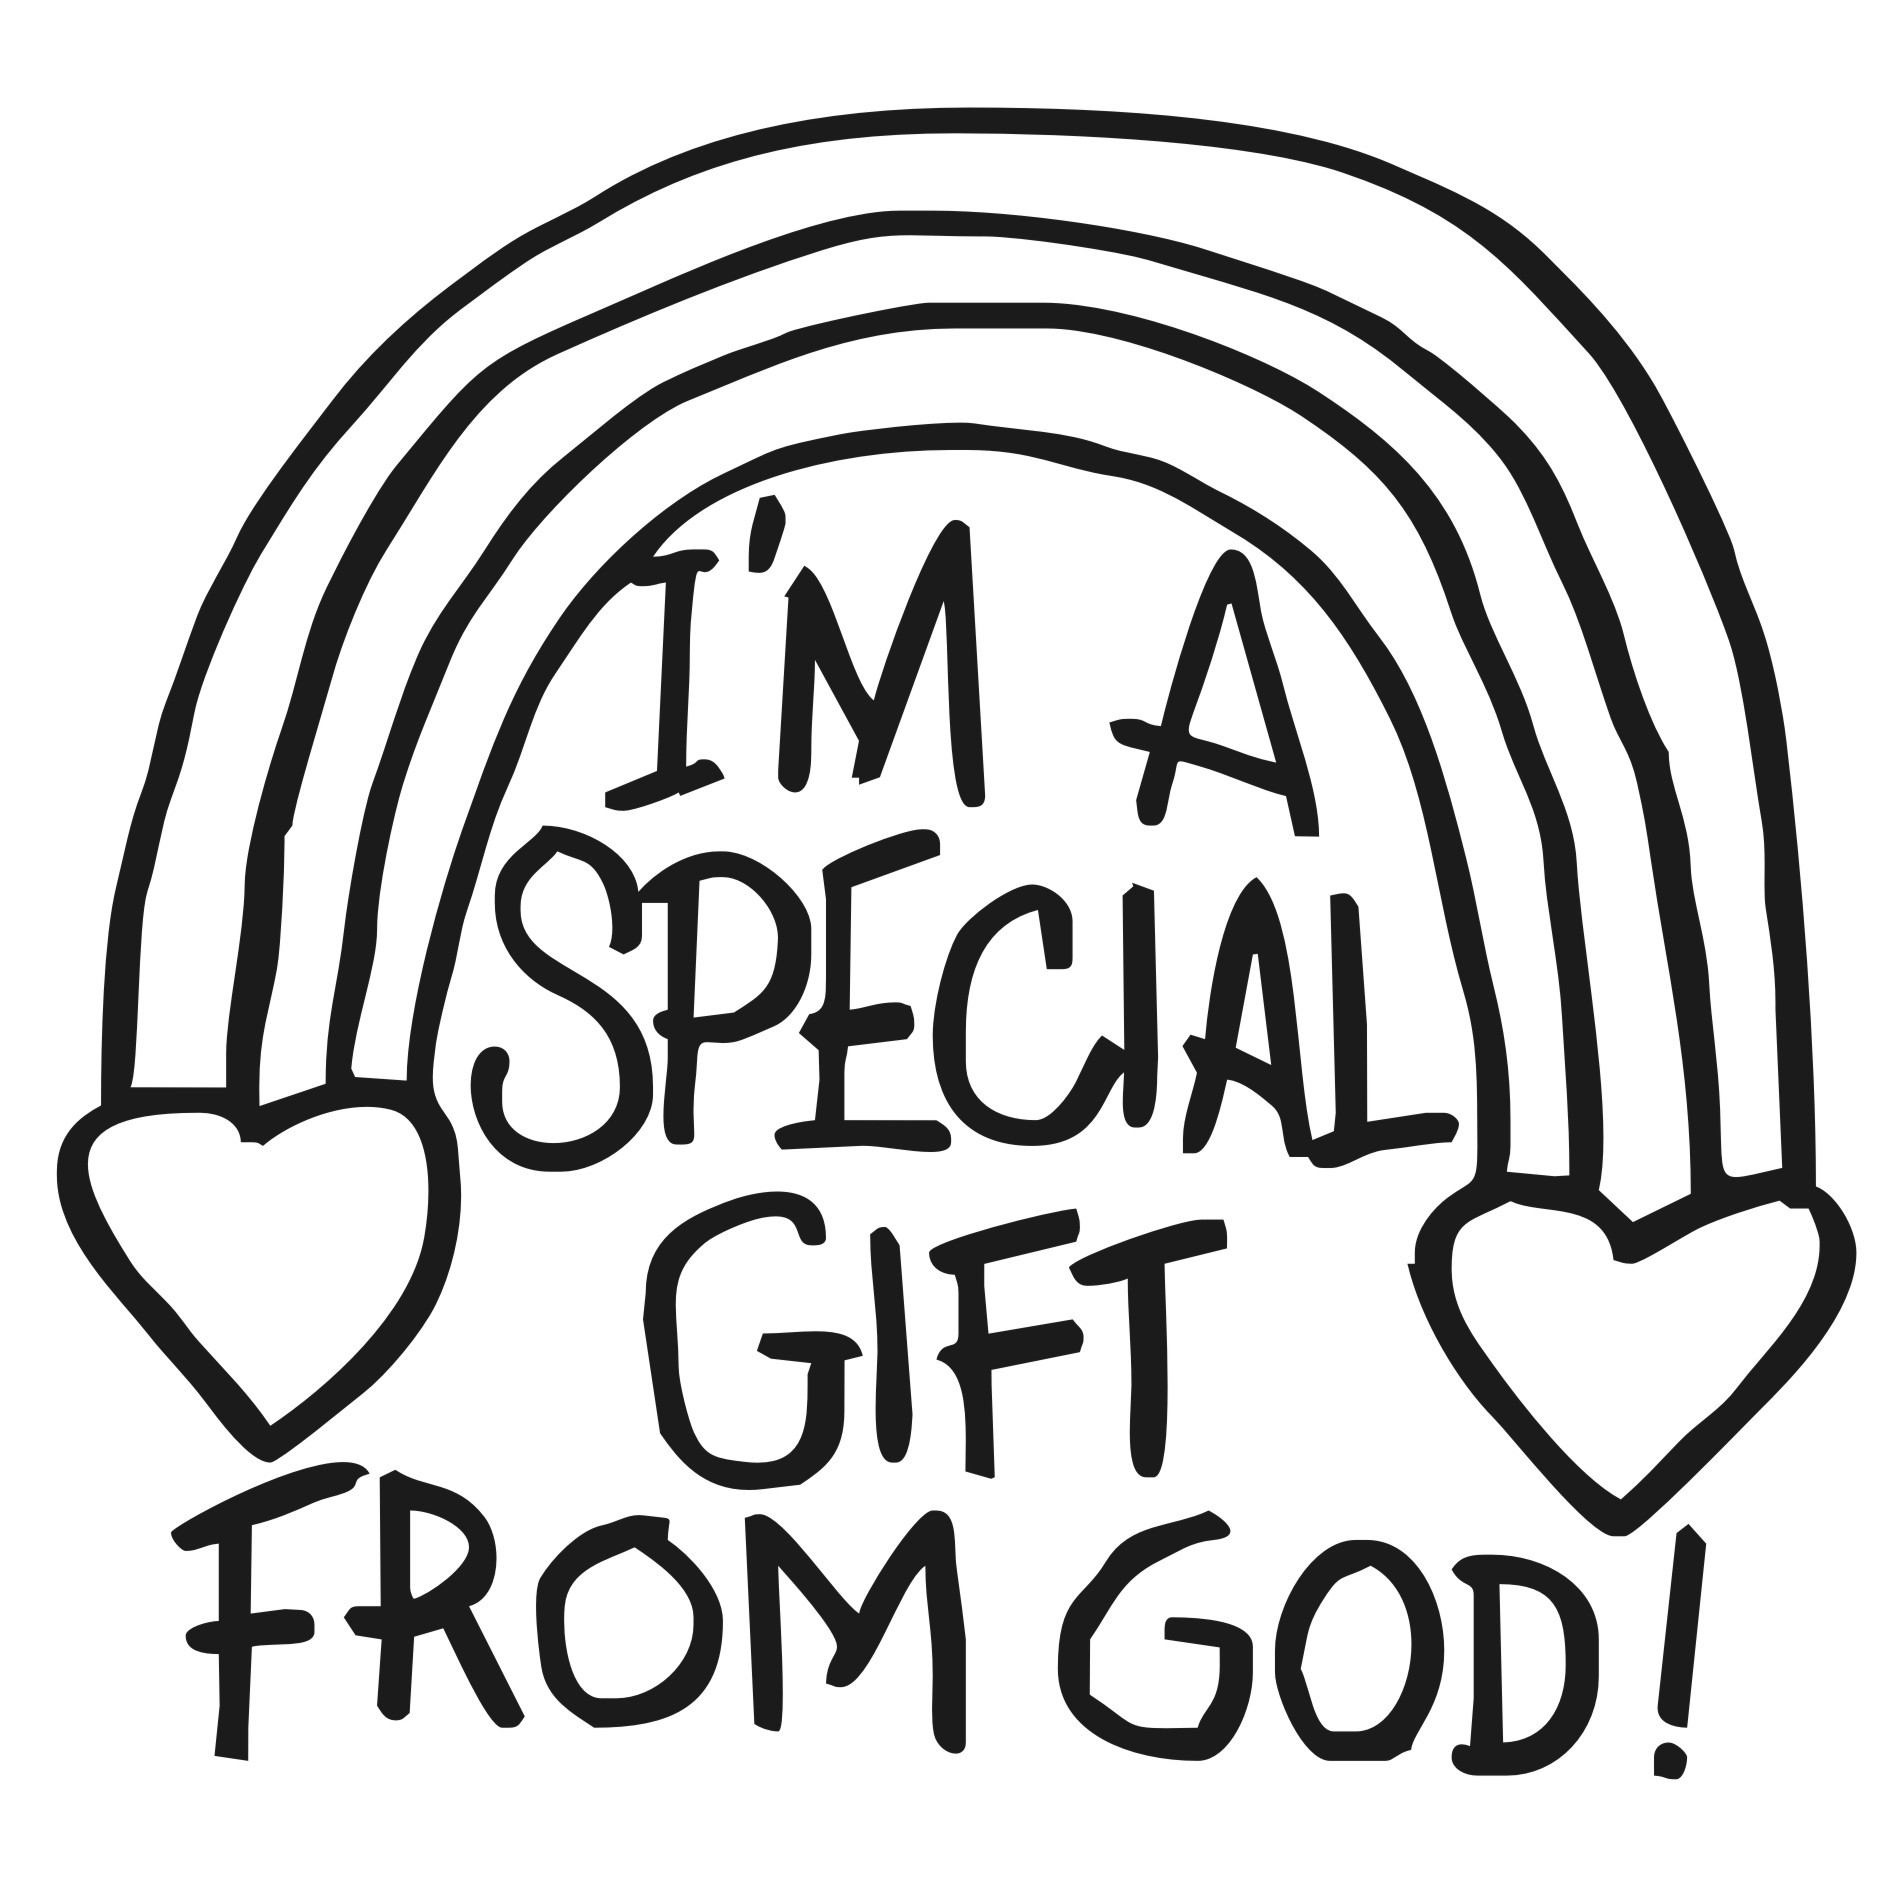 Children Gifts From God
 Clipart & Design Ideas Clipart Religious Special Gift